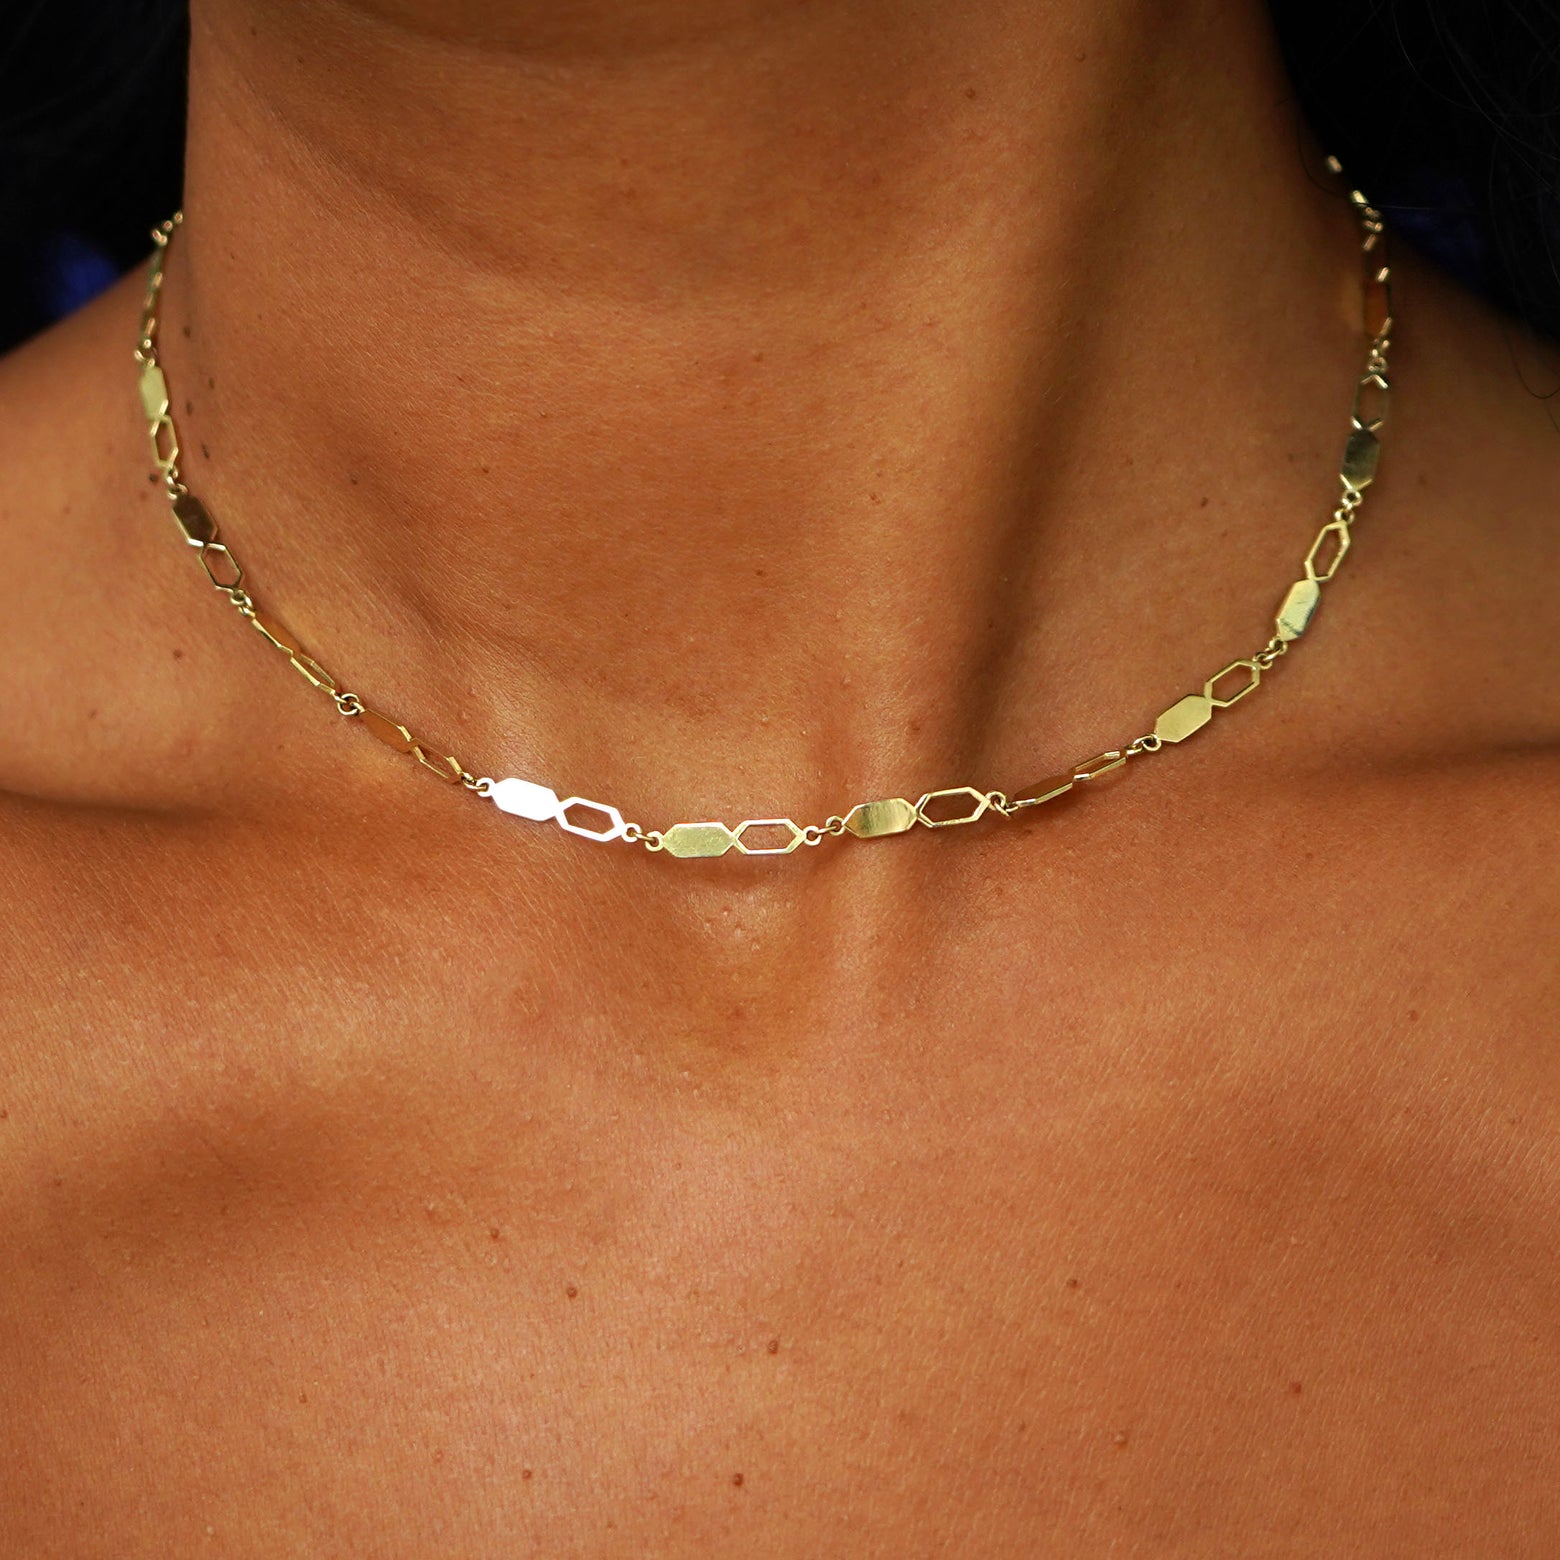 A model's neck wearing a solid 14k yellow gold Tanlah Chain